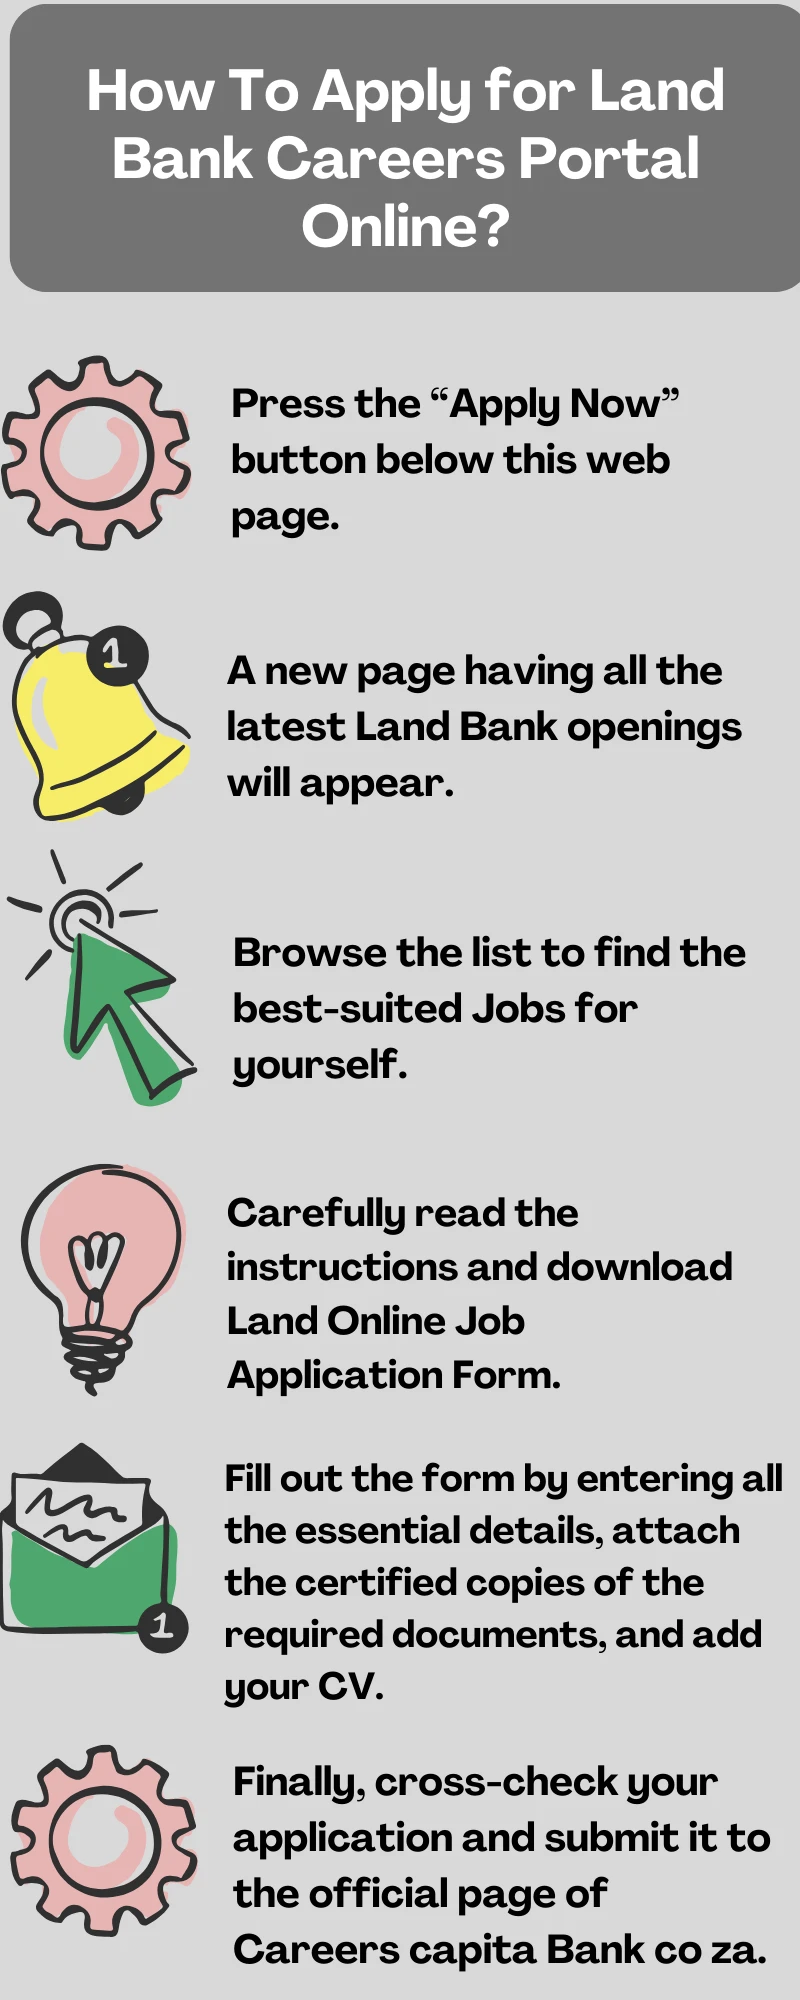 How To Apply for Land Bank Careers Portal Online?